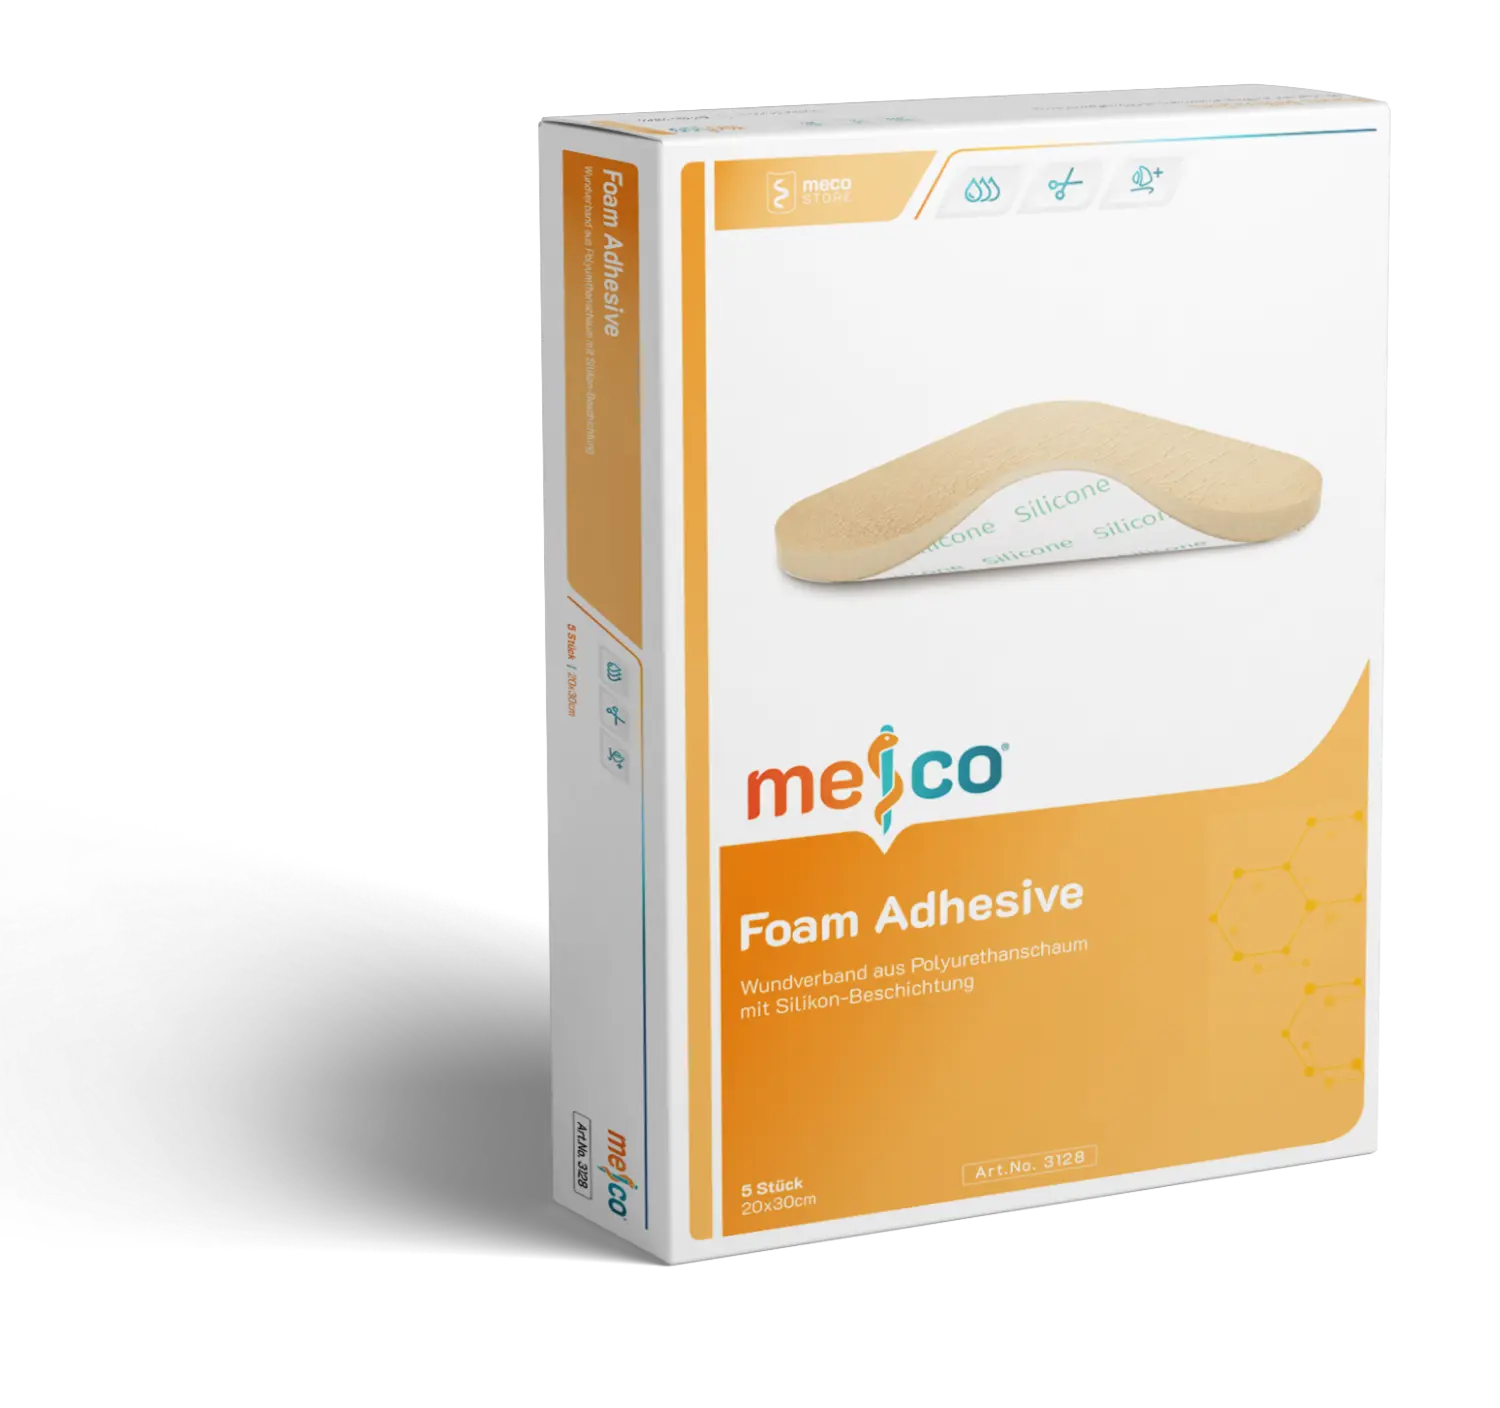 meco foam adhesive designed and developed for special wound care